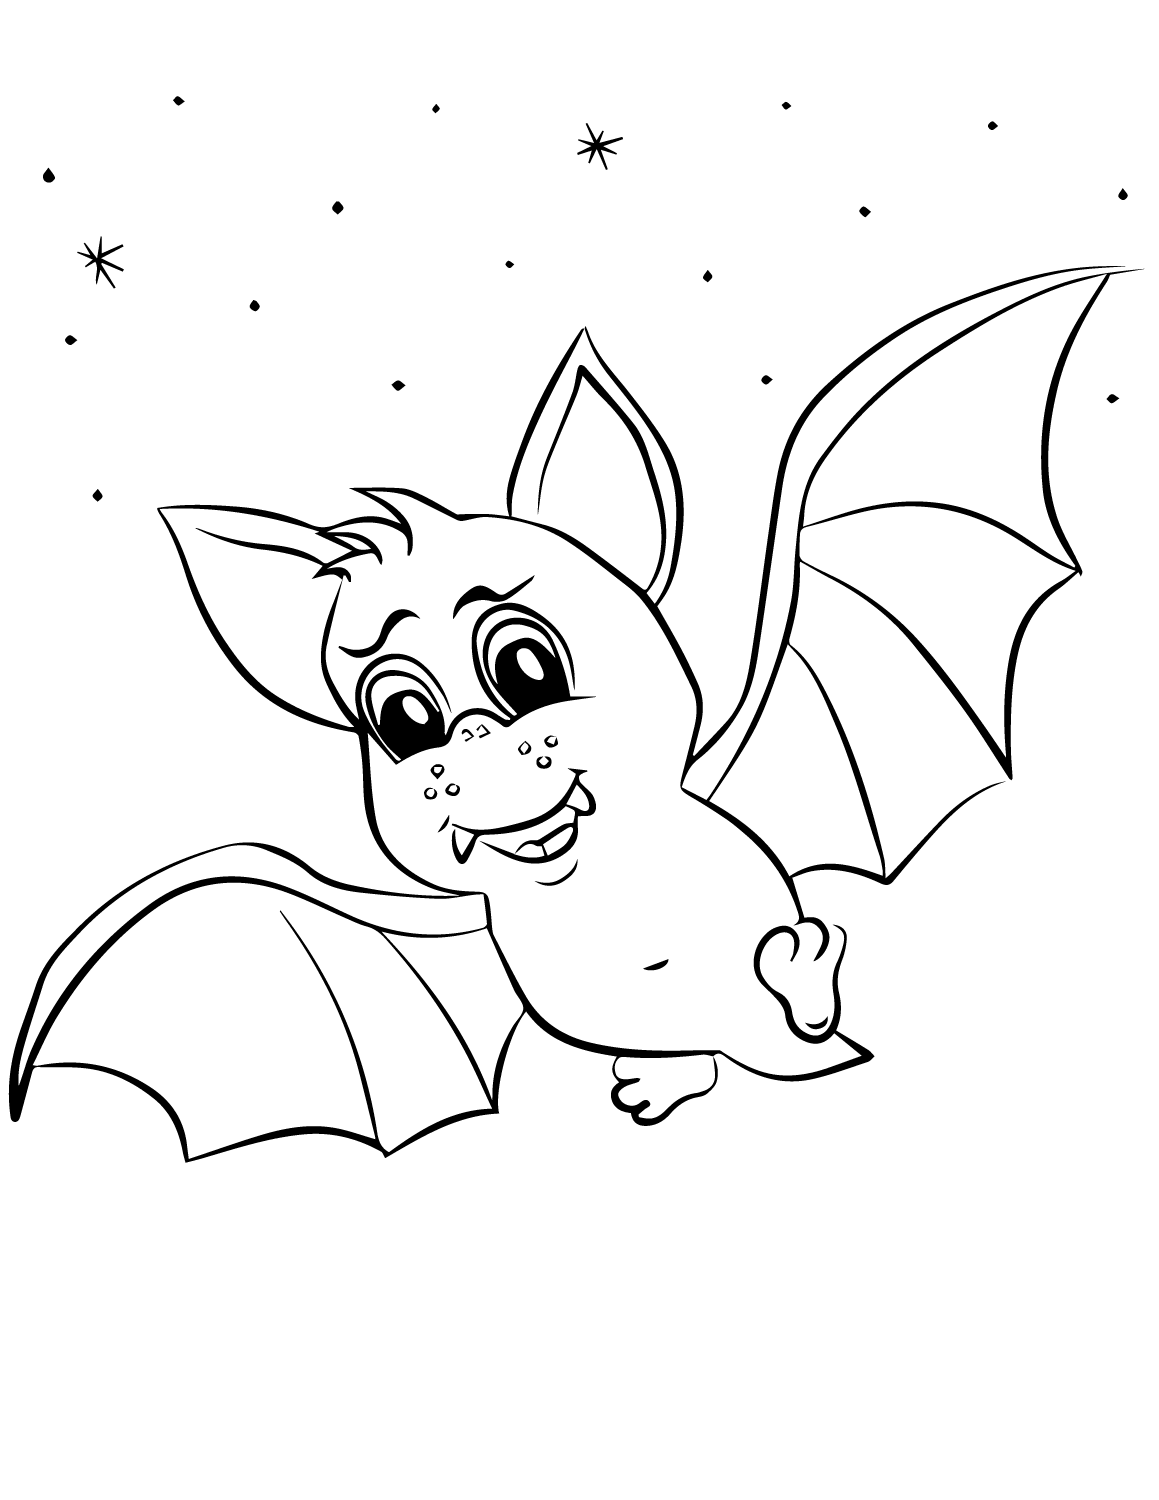 Free Image For Everyone Coloring Page